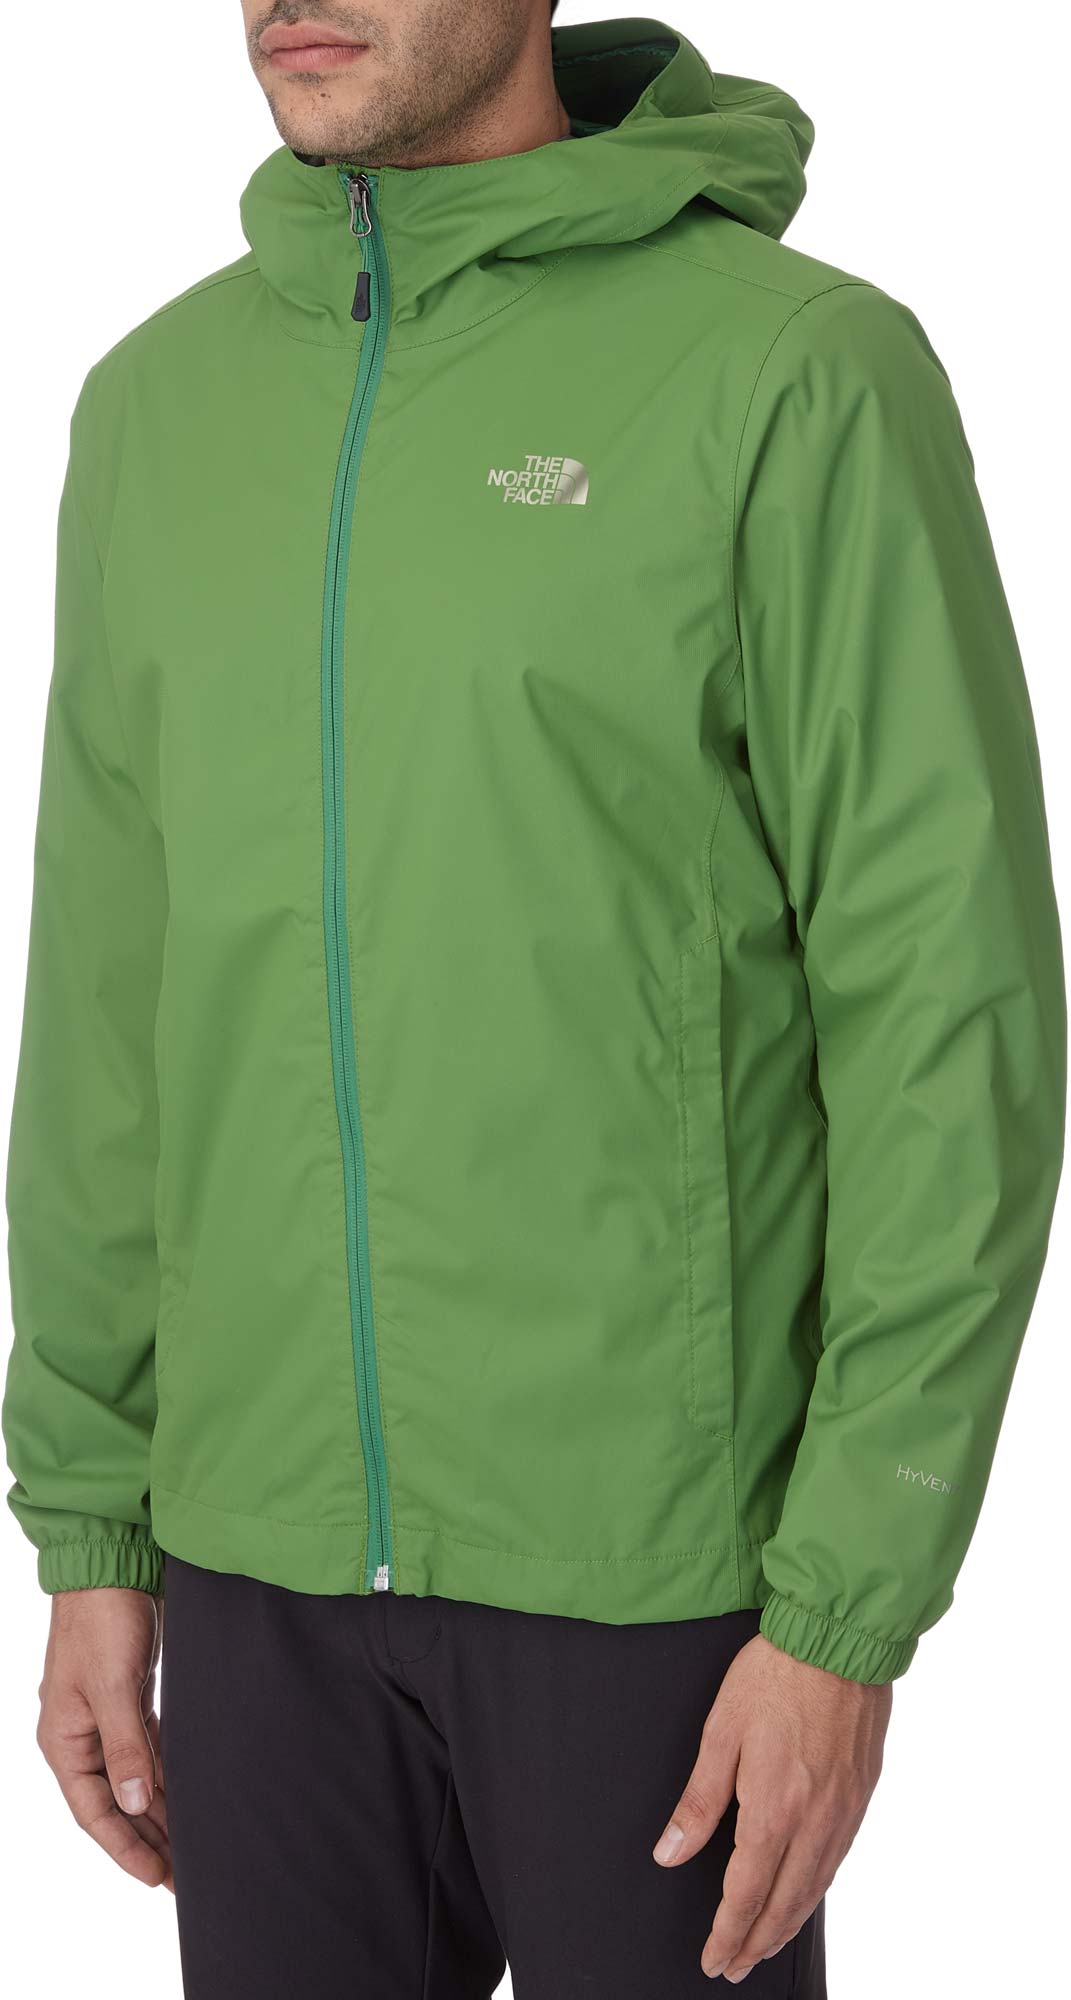 Shop The North Face M Quest Jacket Sportisimo - North Face Quest Jacket M , HD Wallpaper & Backgrounds